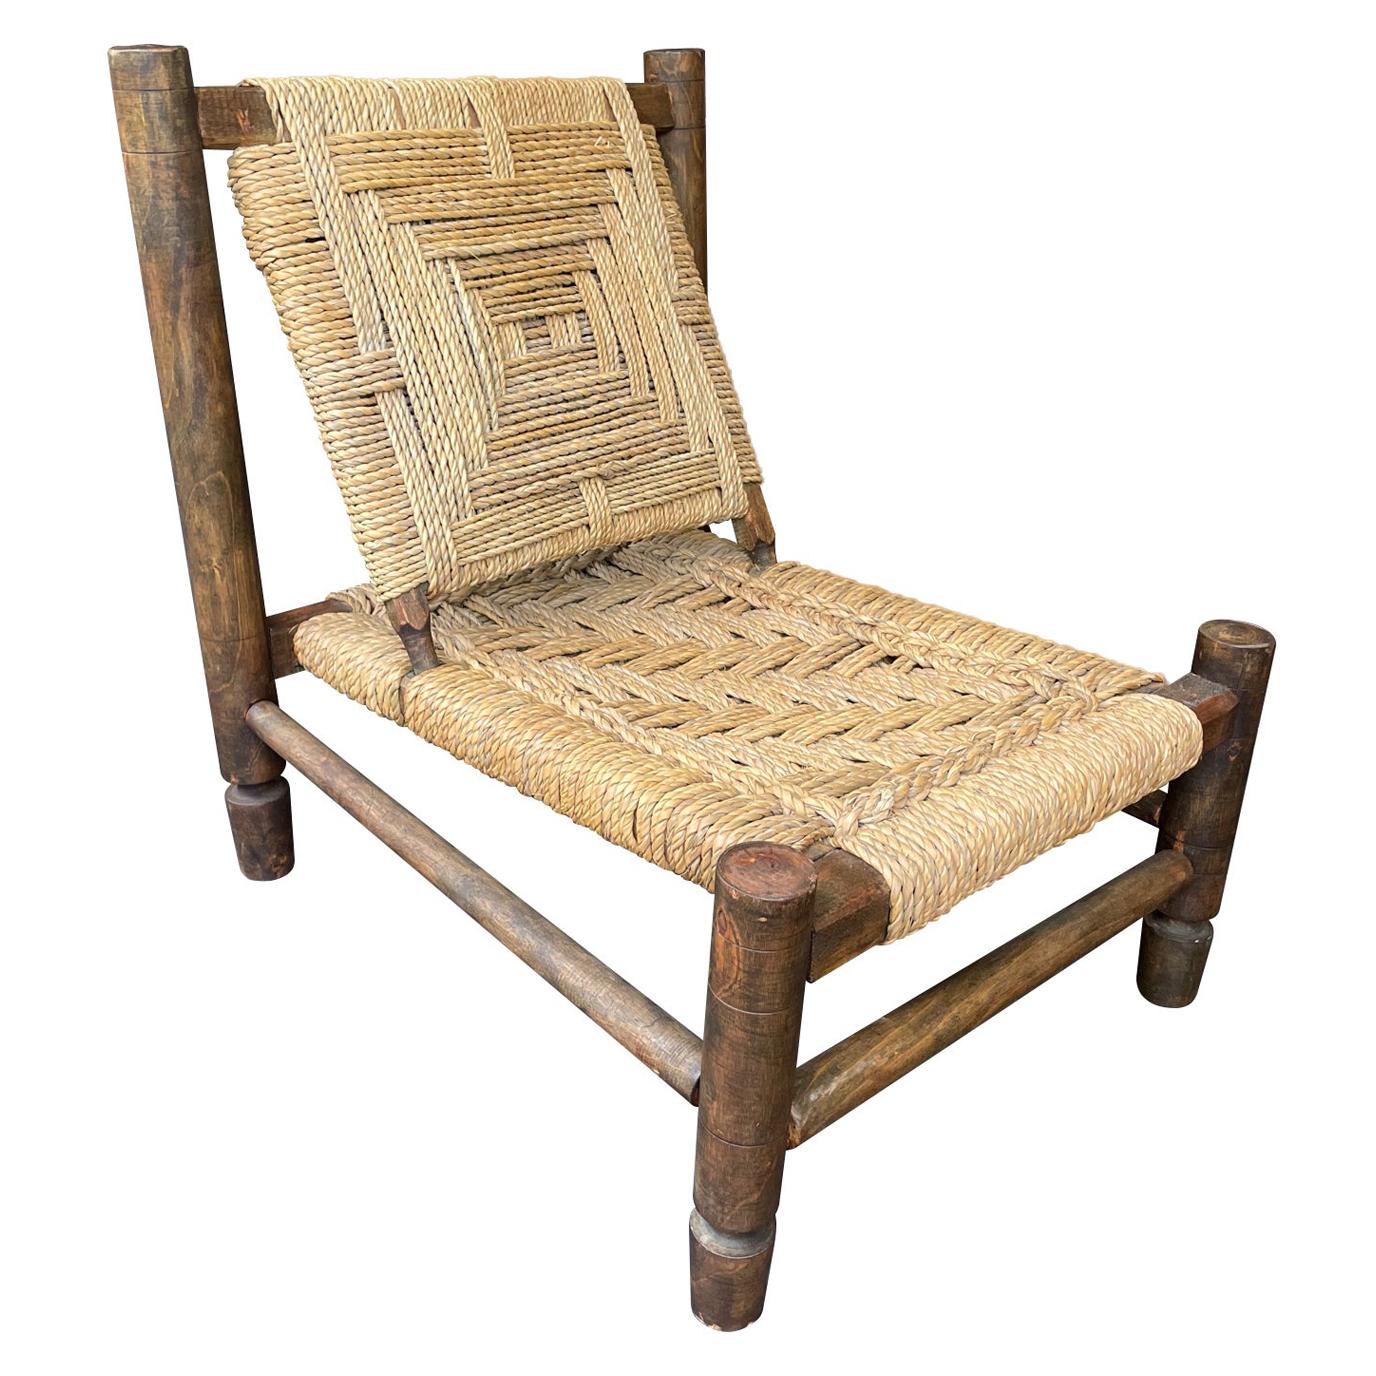 Lovely 1950s Rustic French Rope and Wood Chair by Audoux and Minet